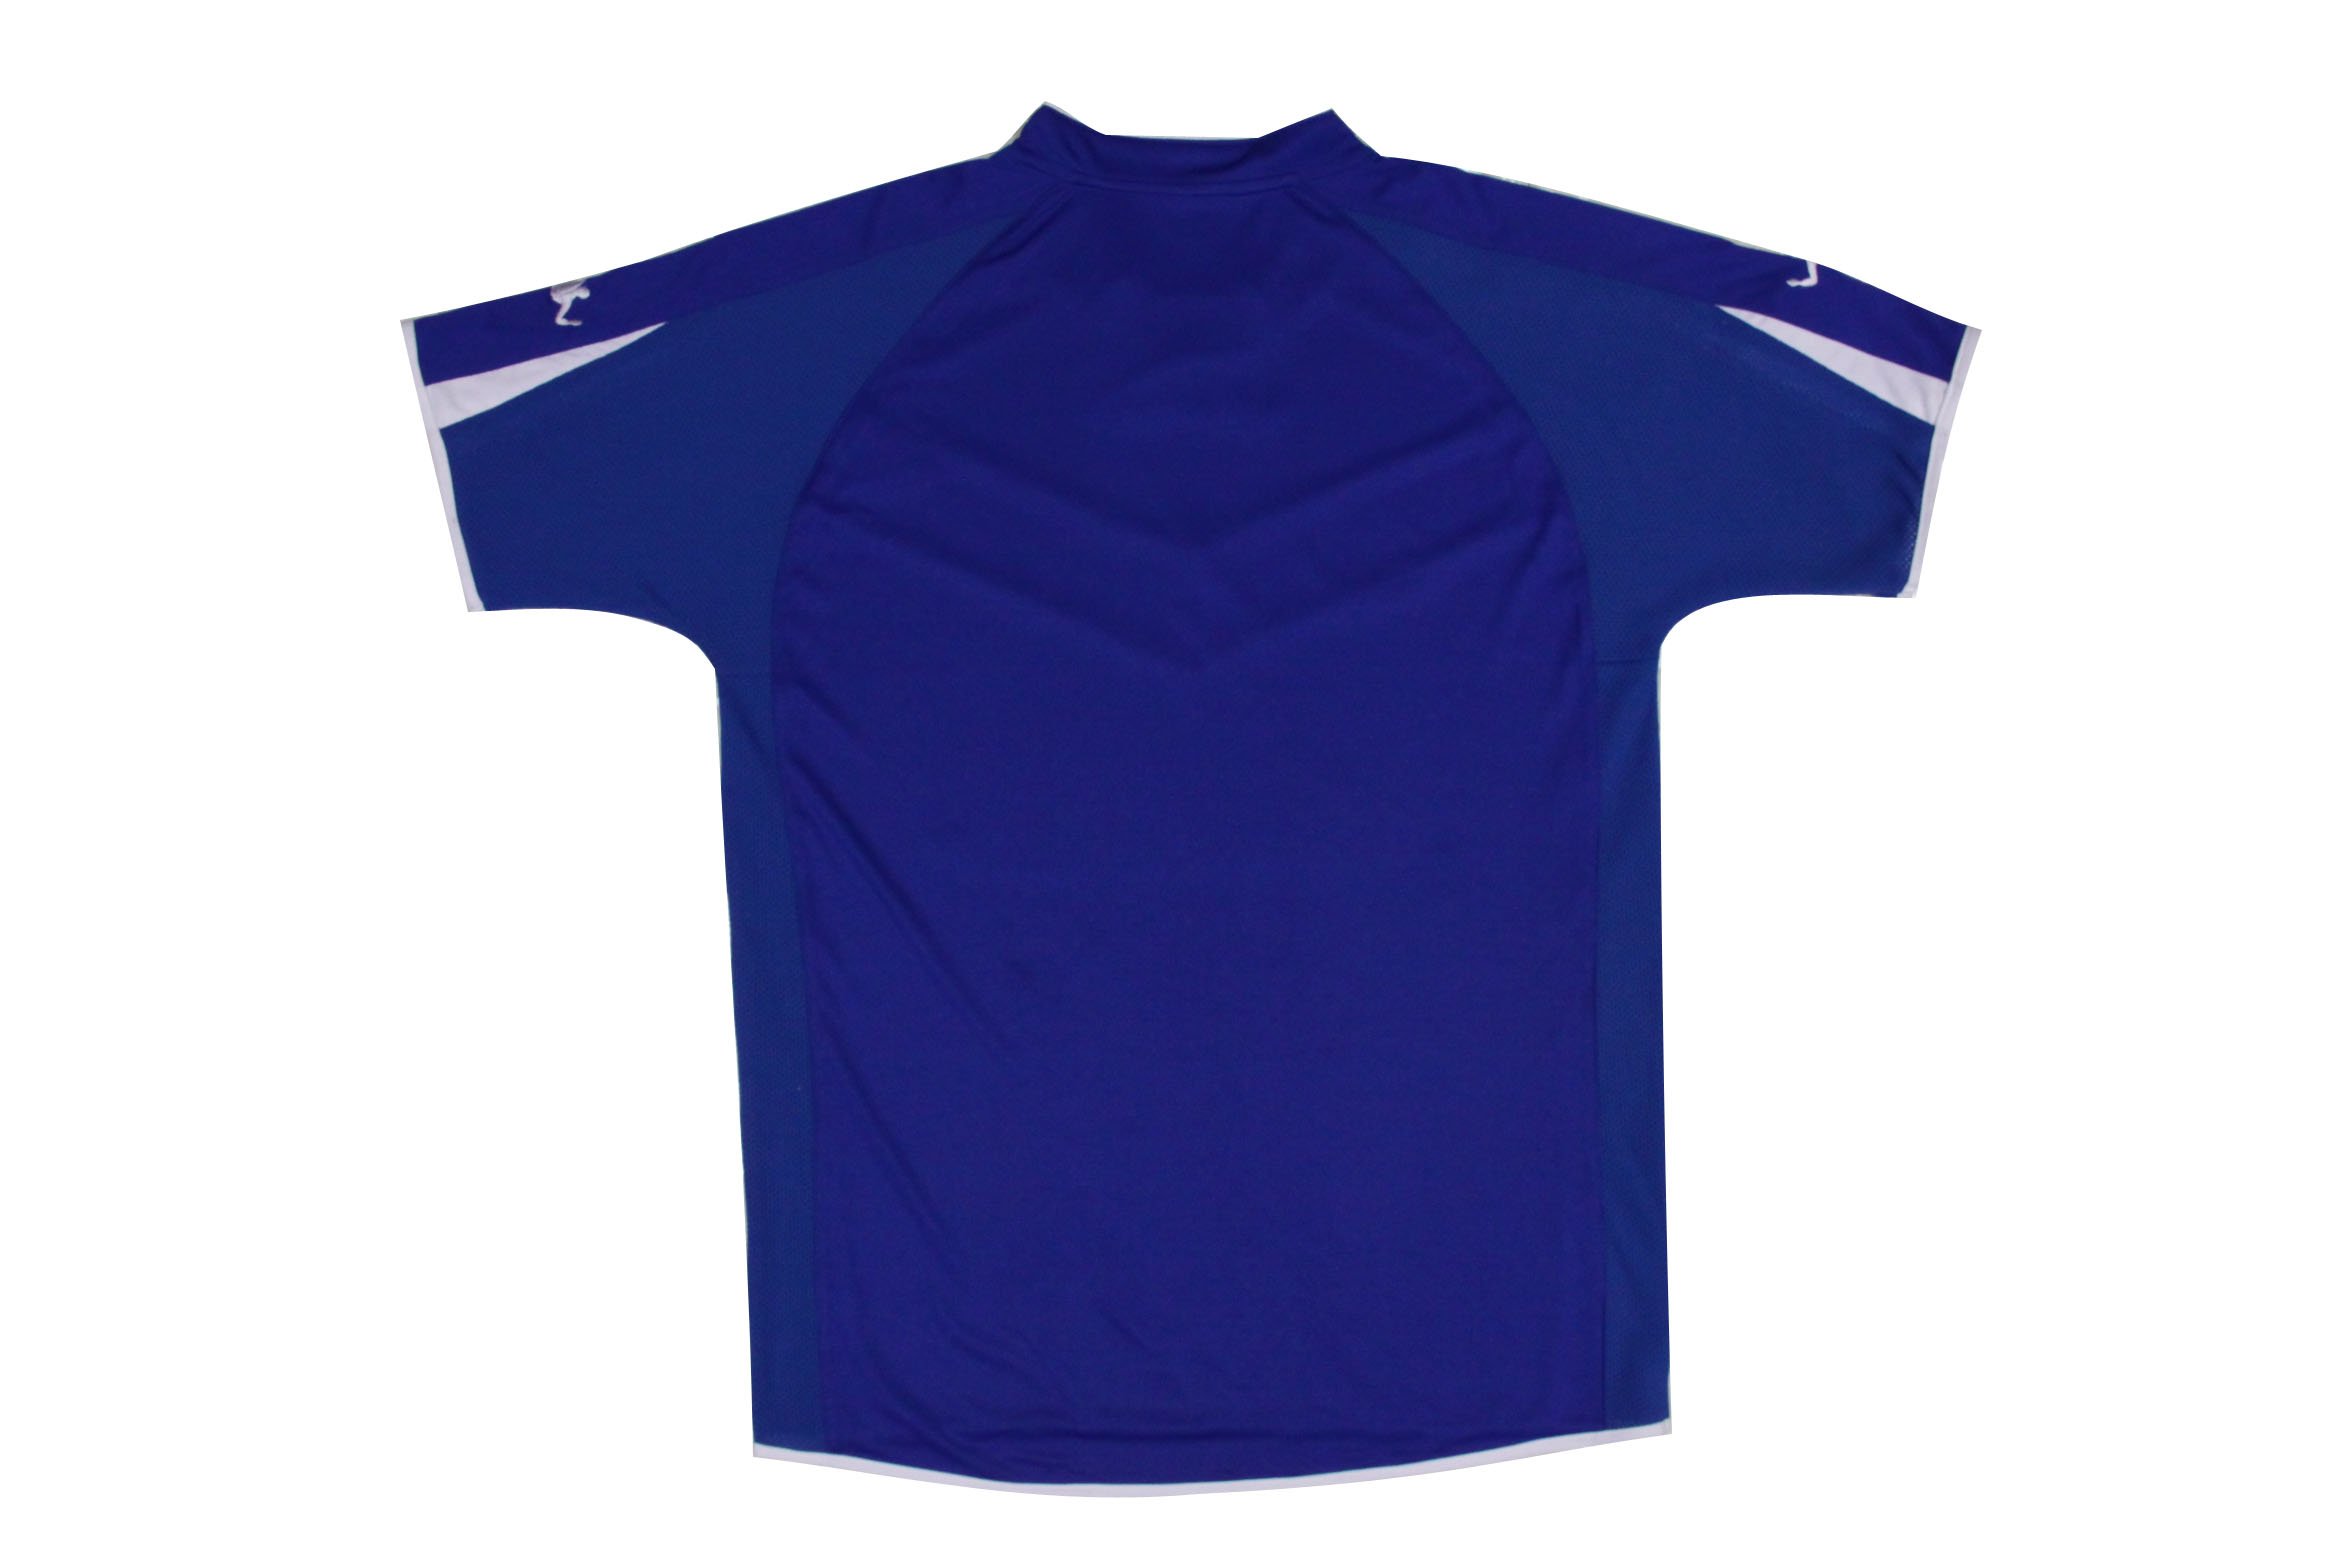 Football jersey blank for team